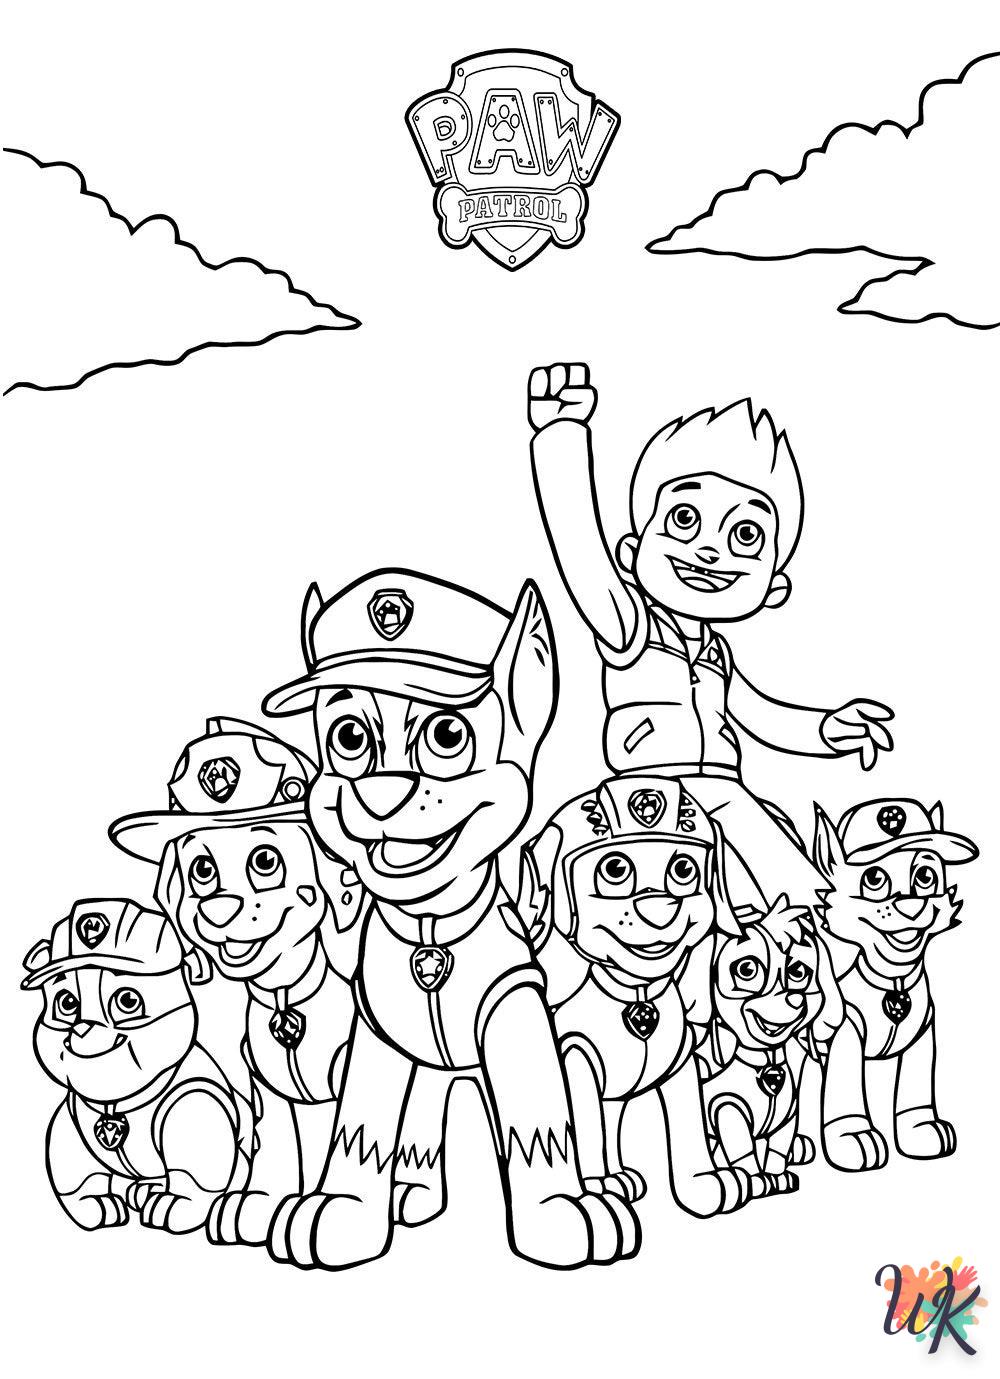 free printable Paw Patrol coloring pages for adults